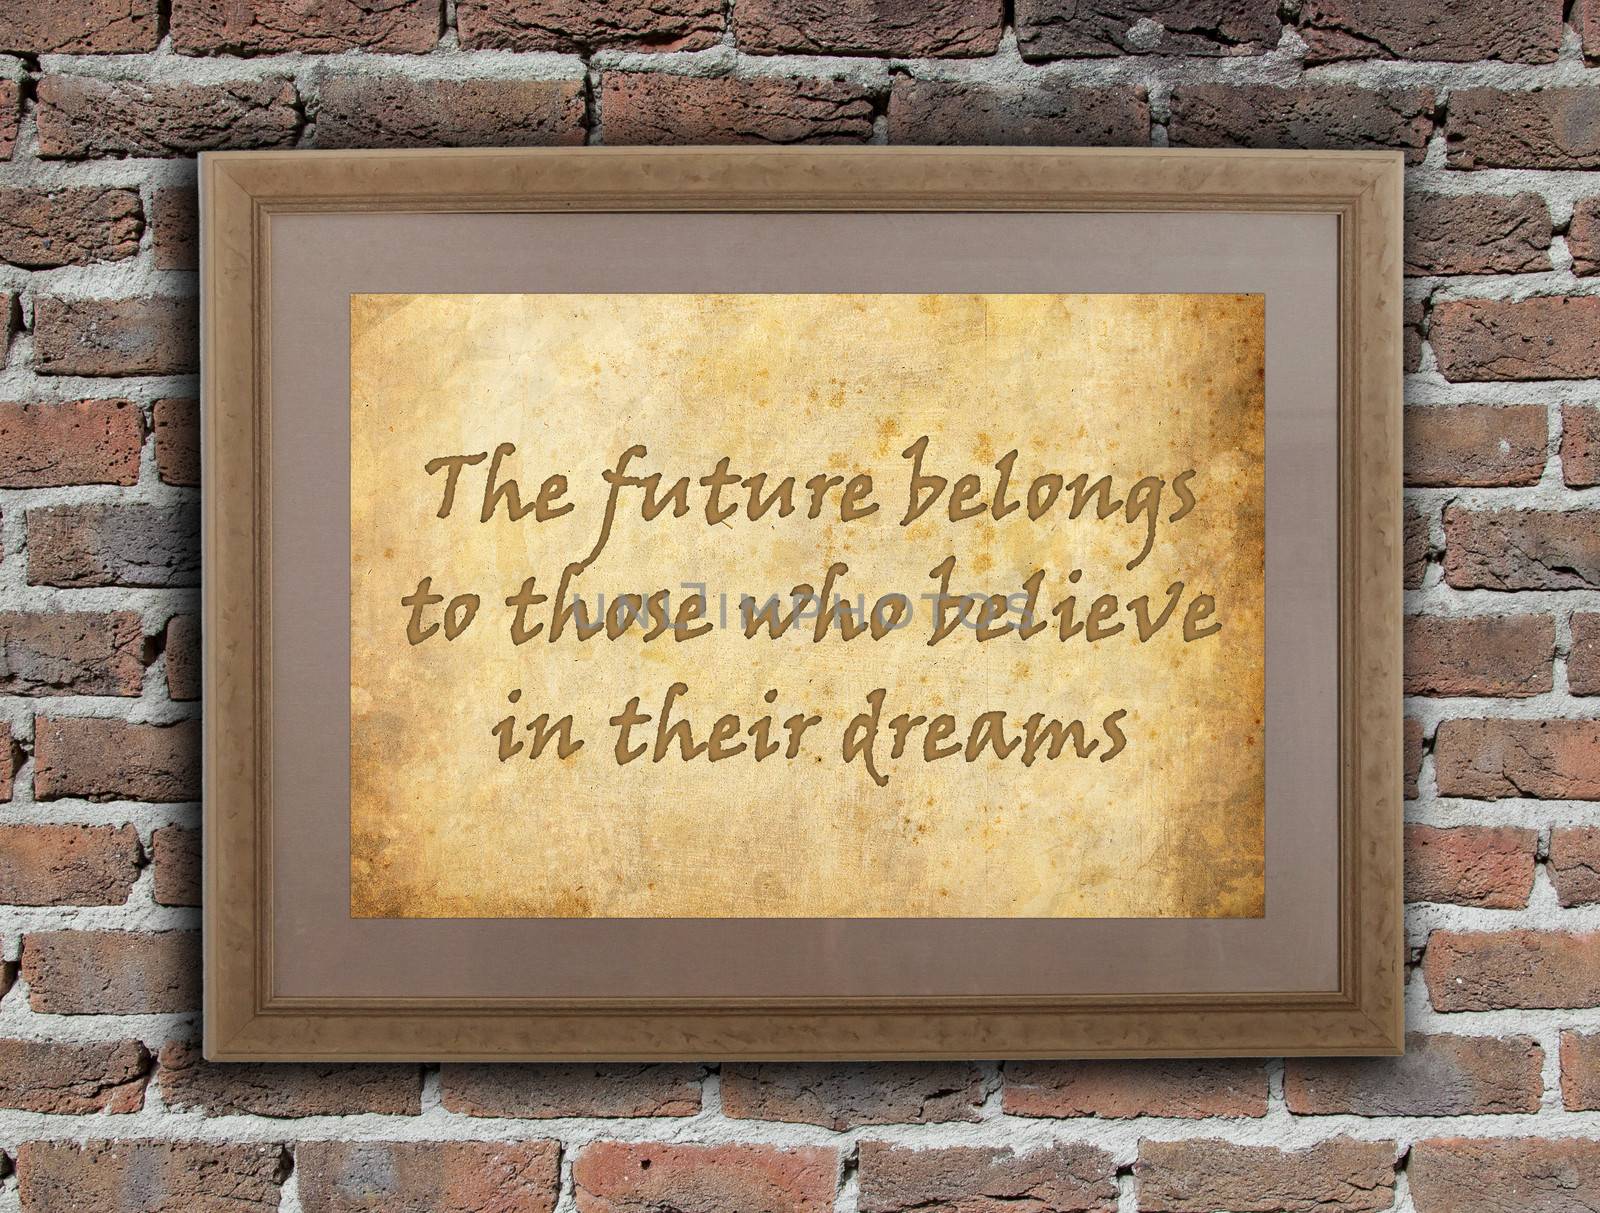 The future belong to those who believe in their dreams by michaklootwijk